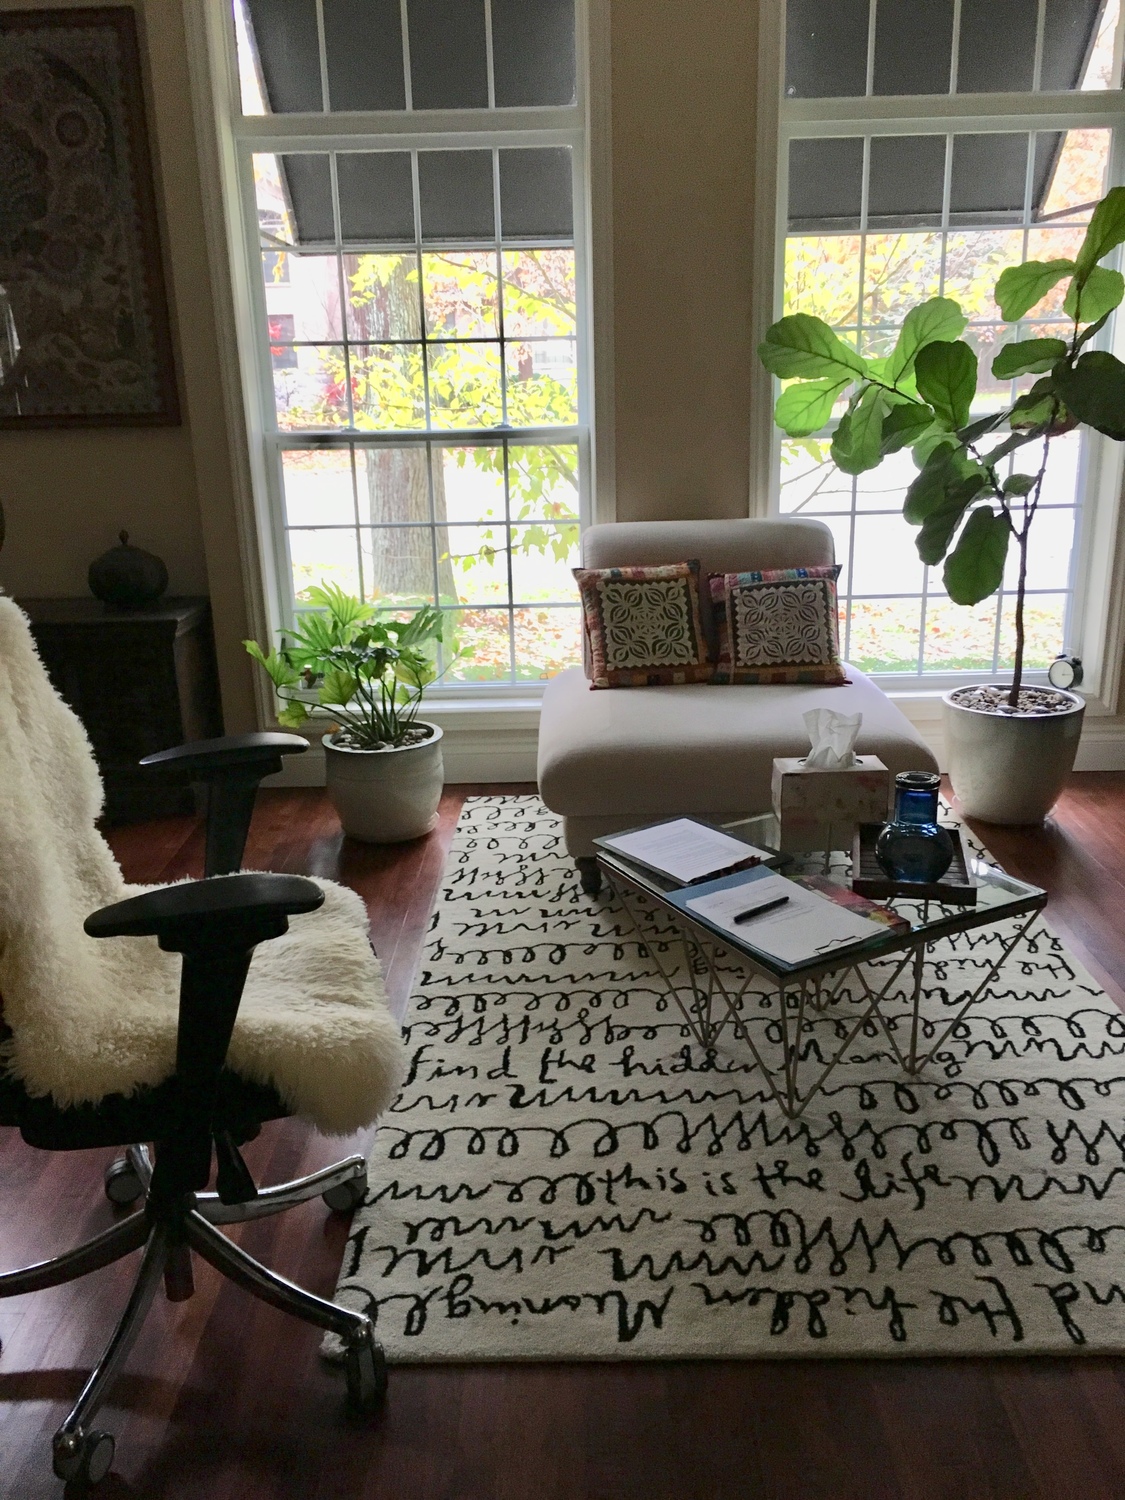 Gallery Photo of I offer my clients a calm confidential, supportive and judgement free space, meeting in person or online via Skype or Google Hangouts.